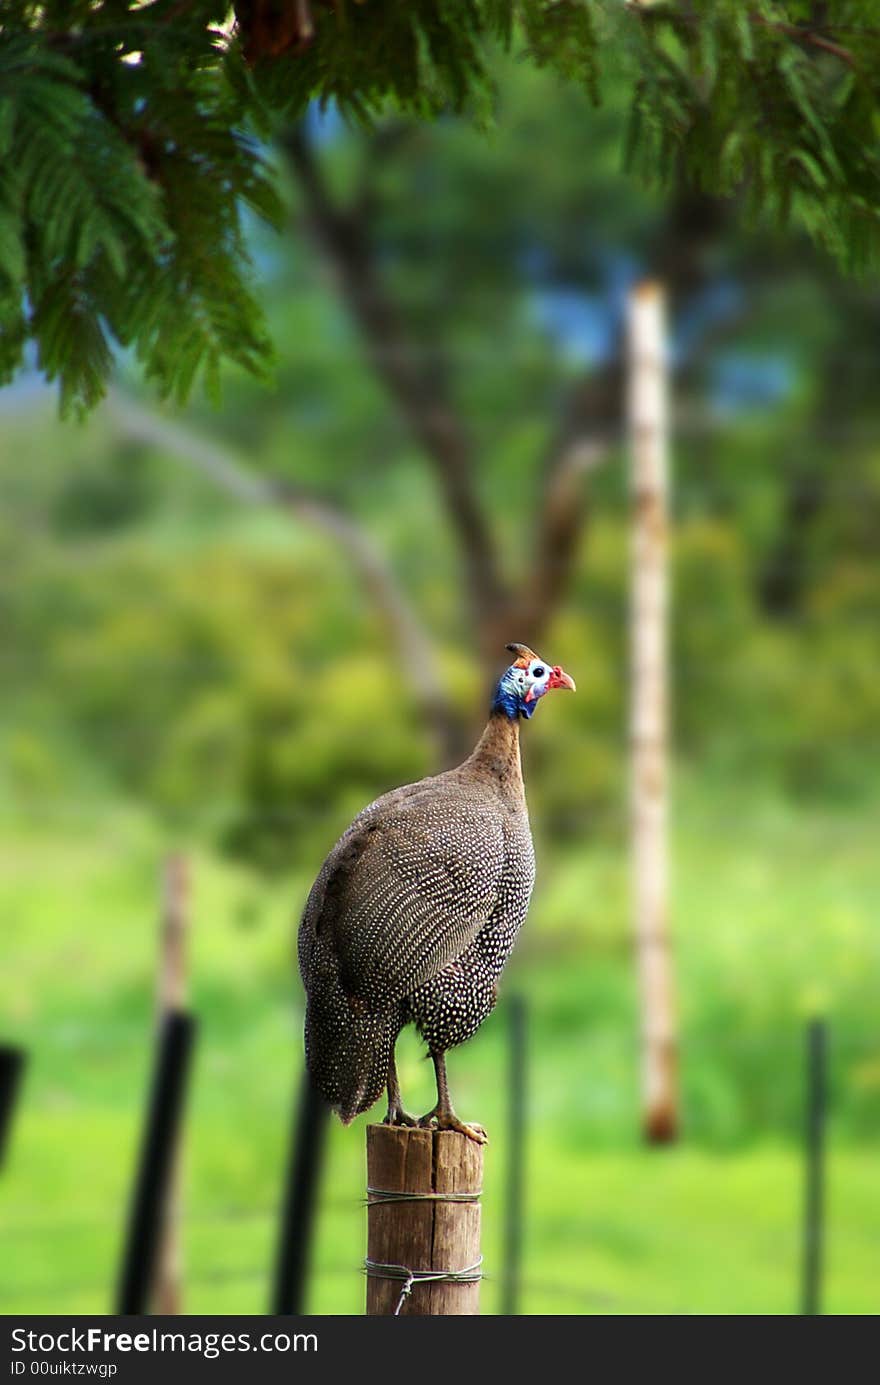 Guinea fowl sitting on a fence post